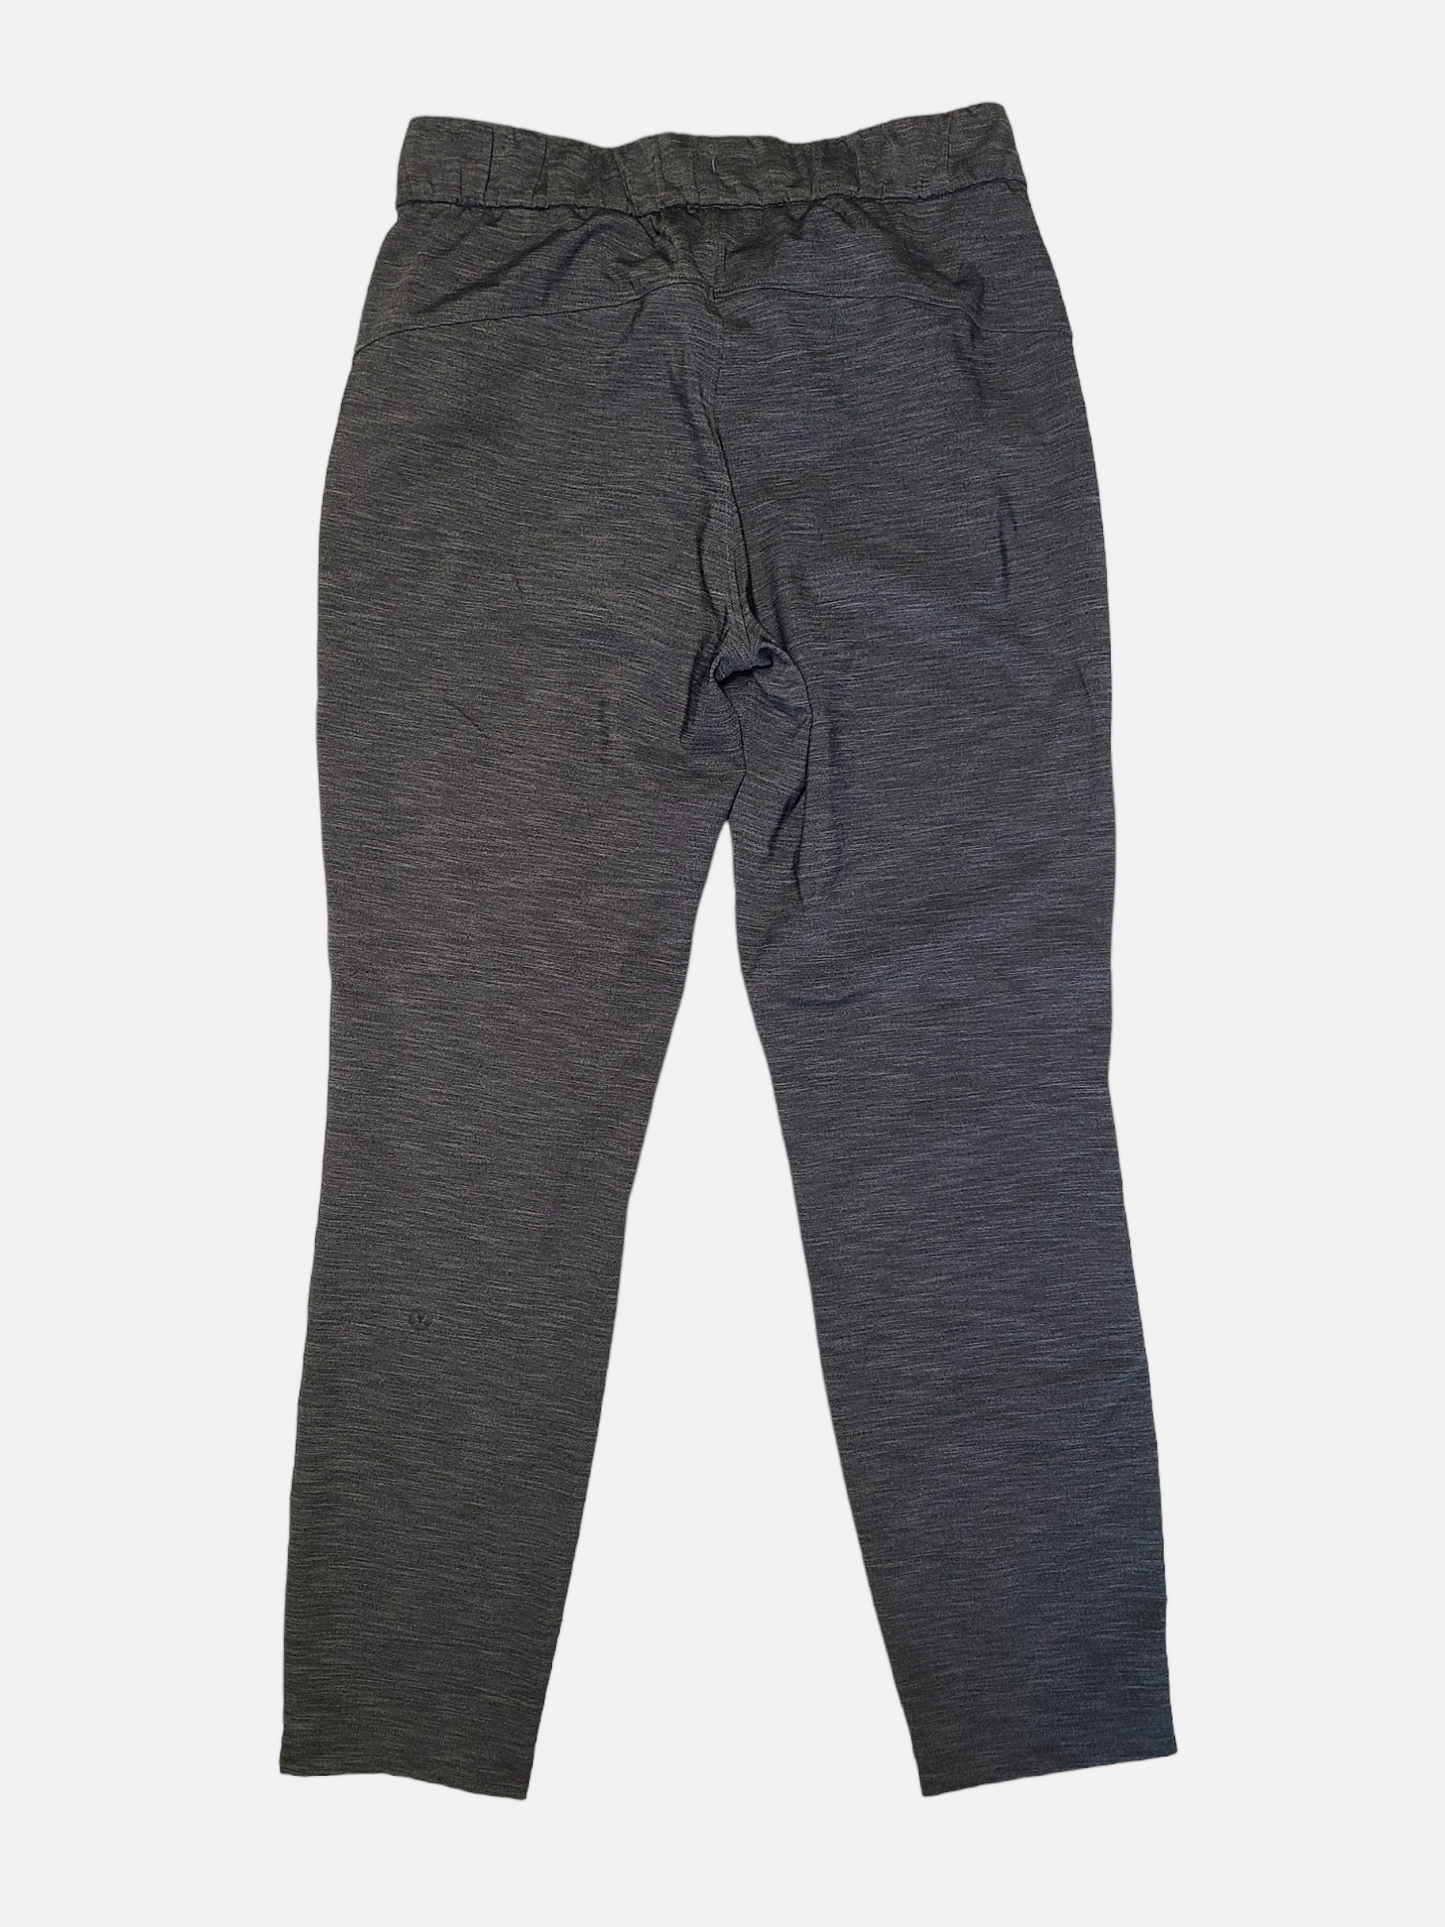 Lululemon On The Fly Pant - Size 4 – Wild Rose Consignment